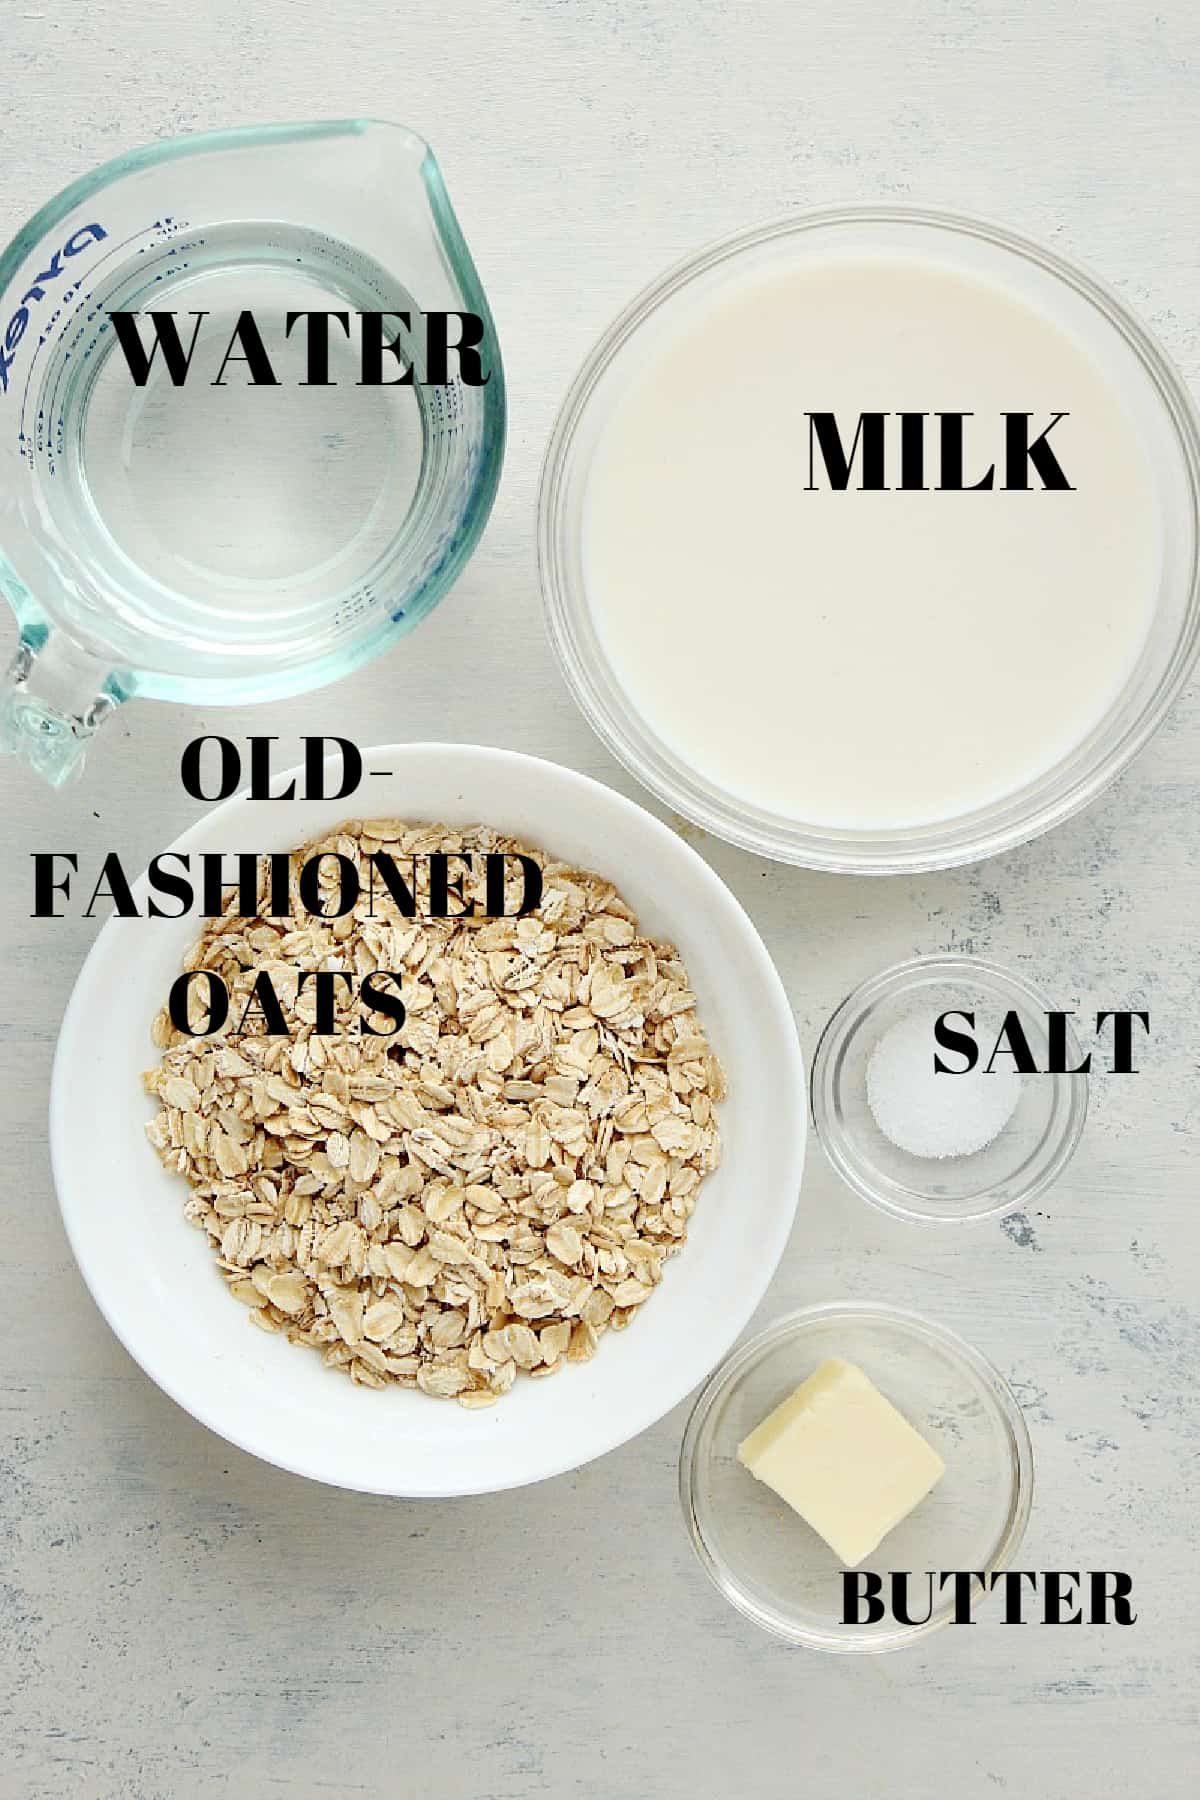 Oats, milk, water, salt and butter in small bowls, on a gray background.